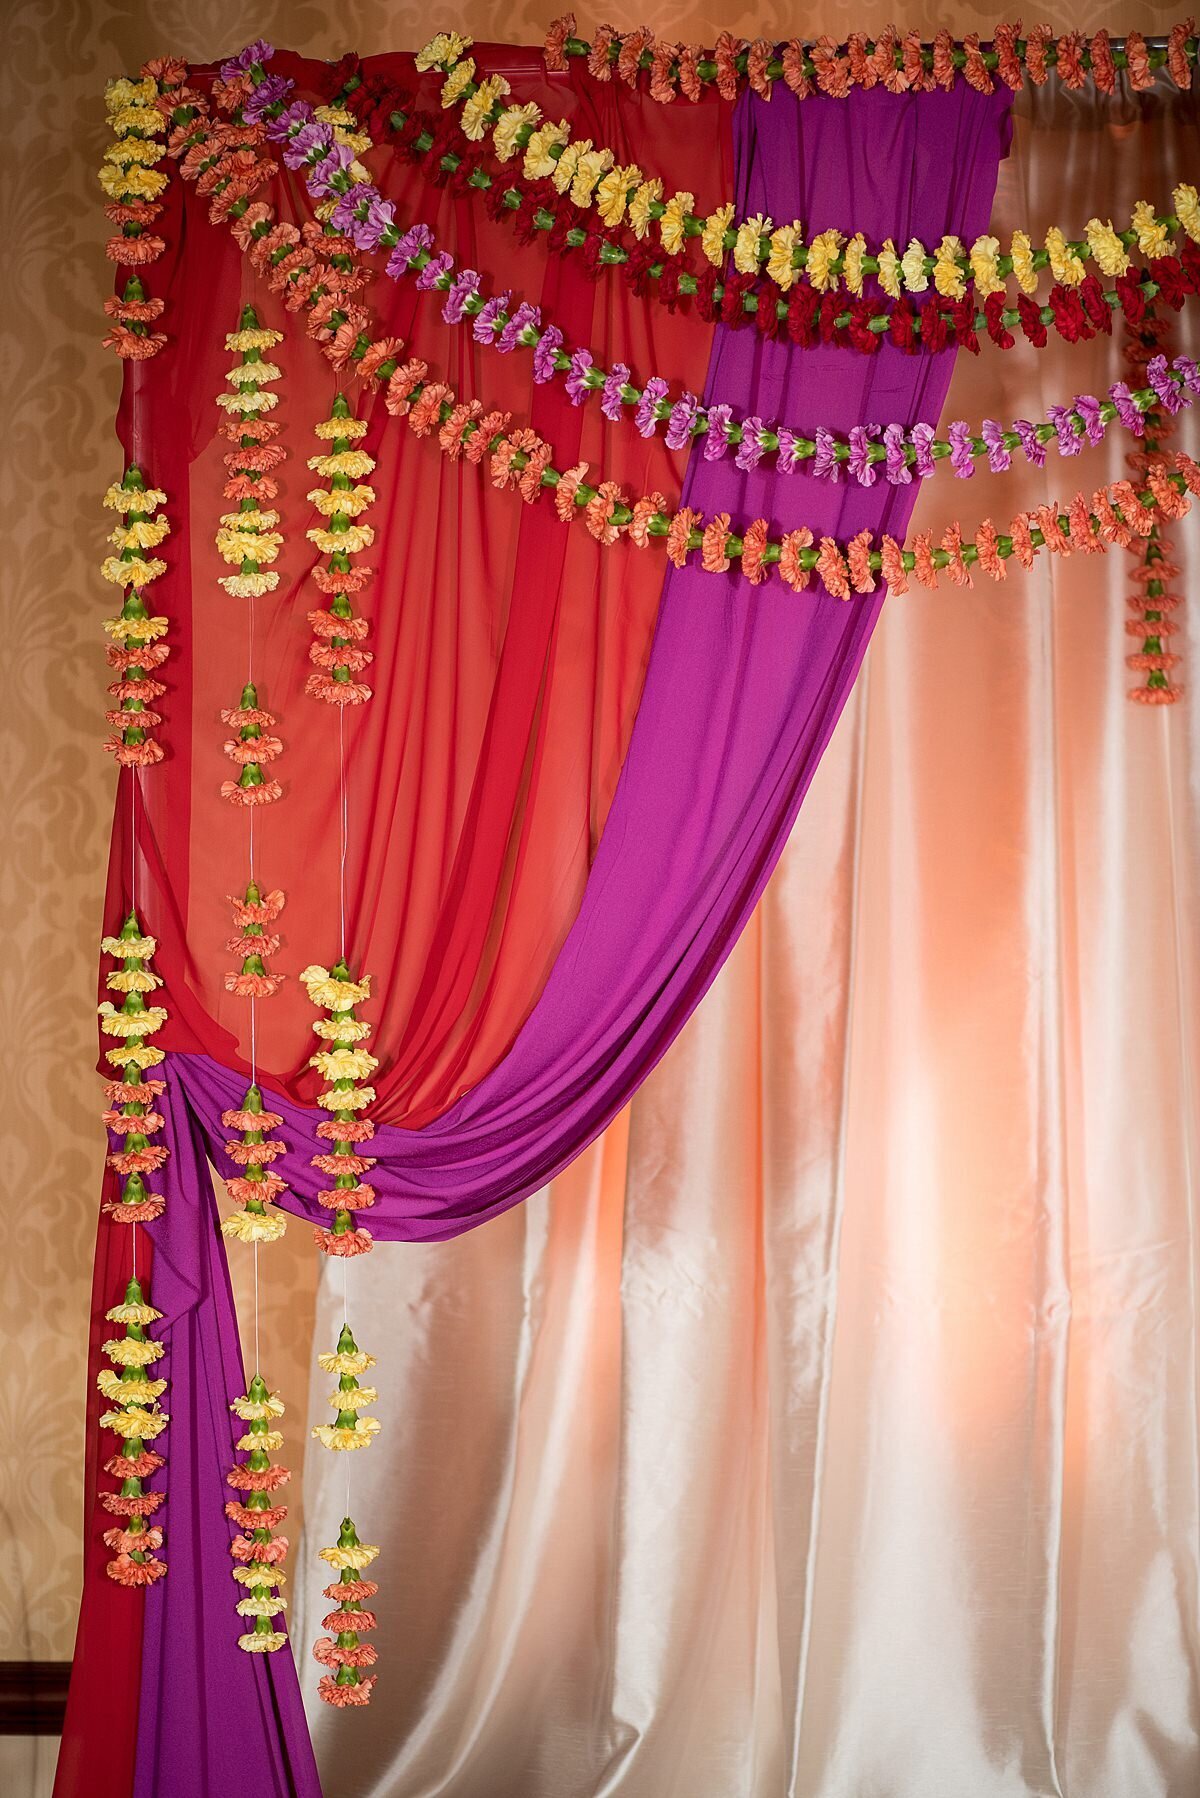 Strands of orange and yellow carnations hanging on the edge of a red and purple mandap with ivory drapery.